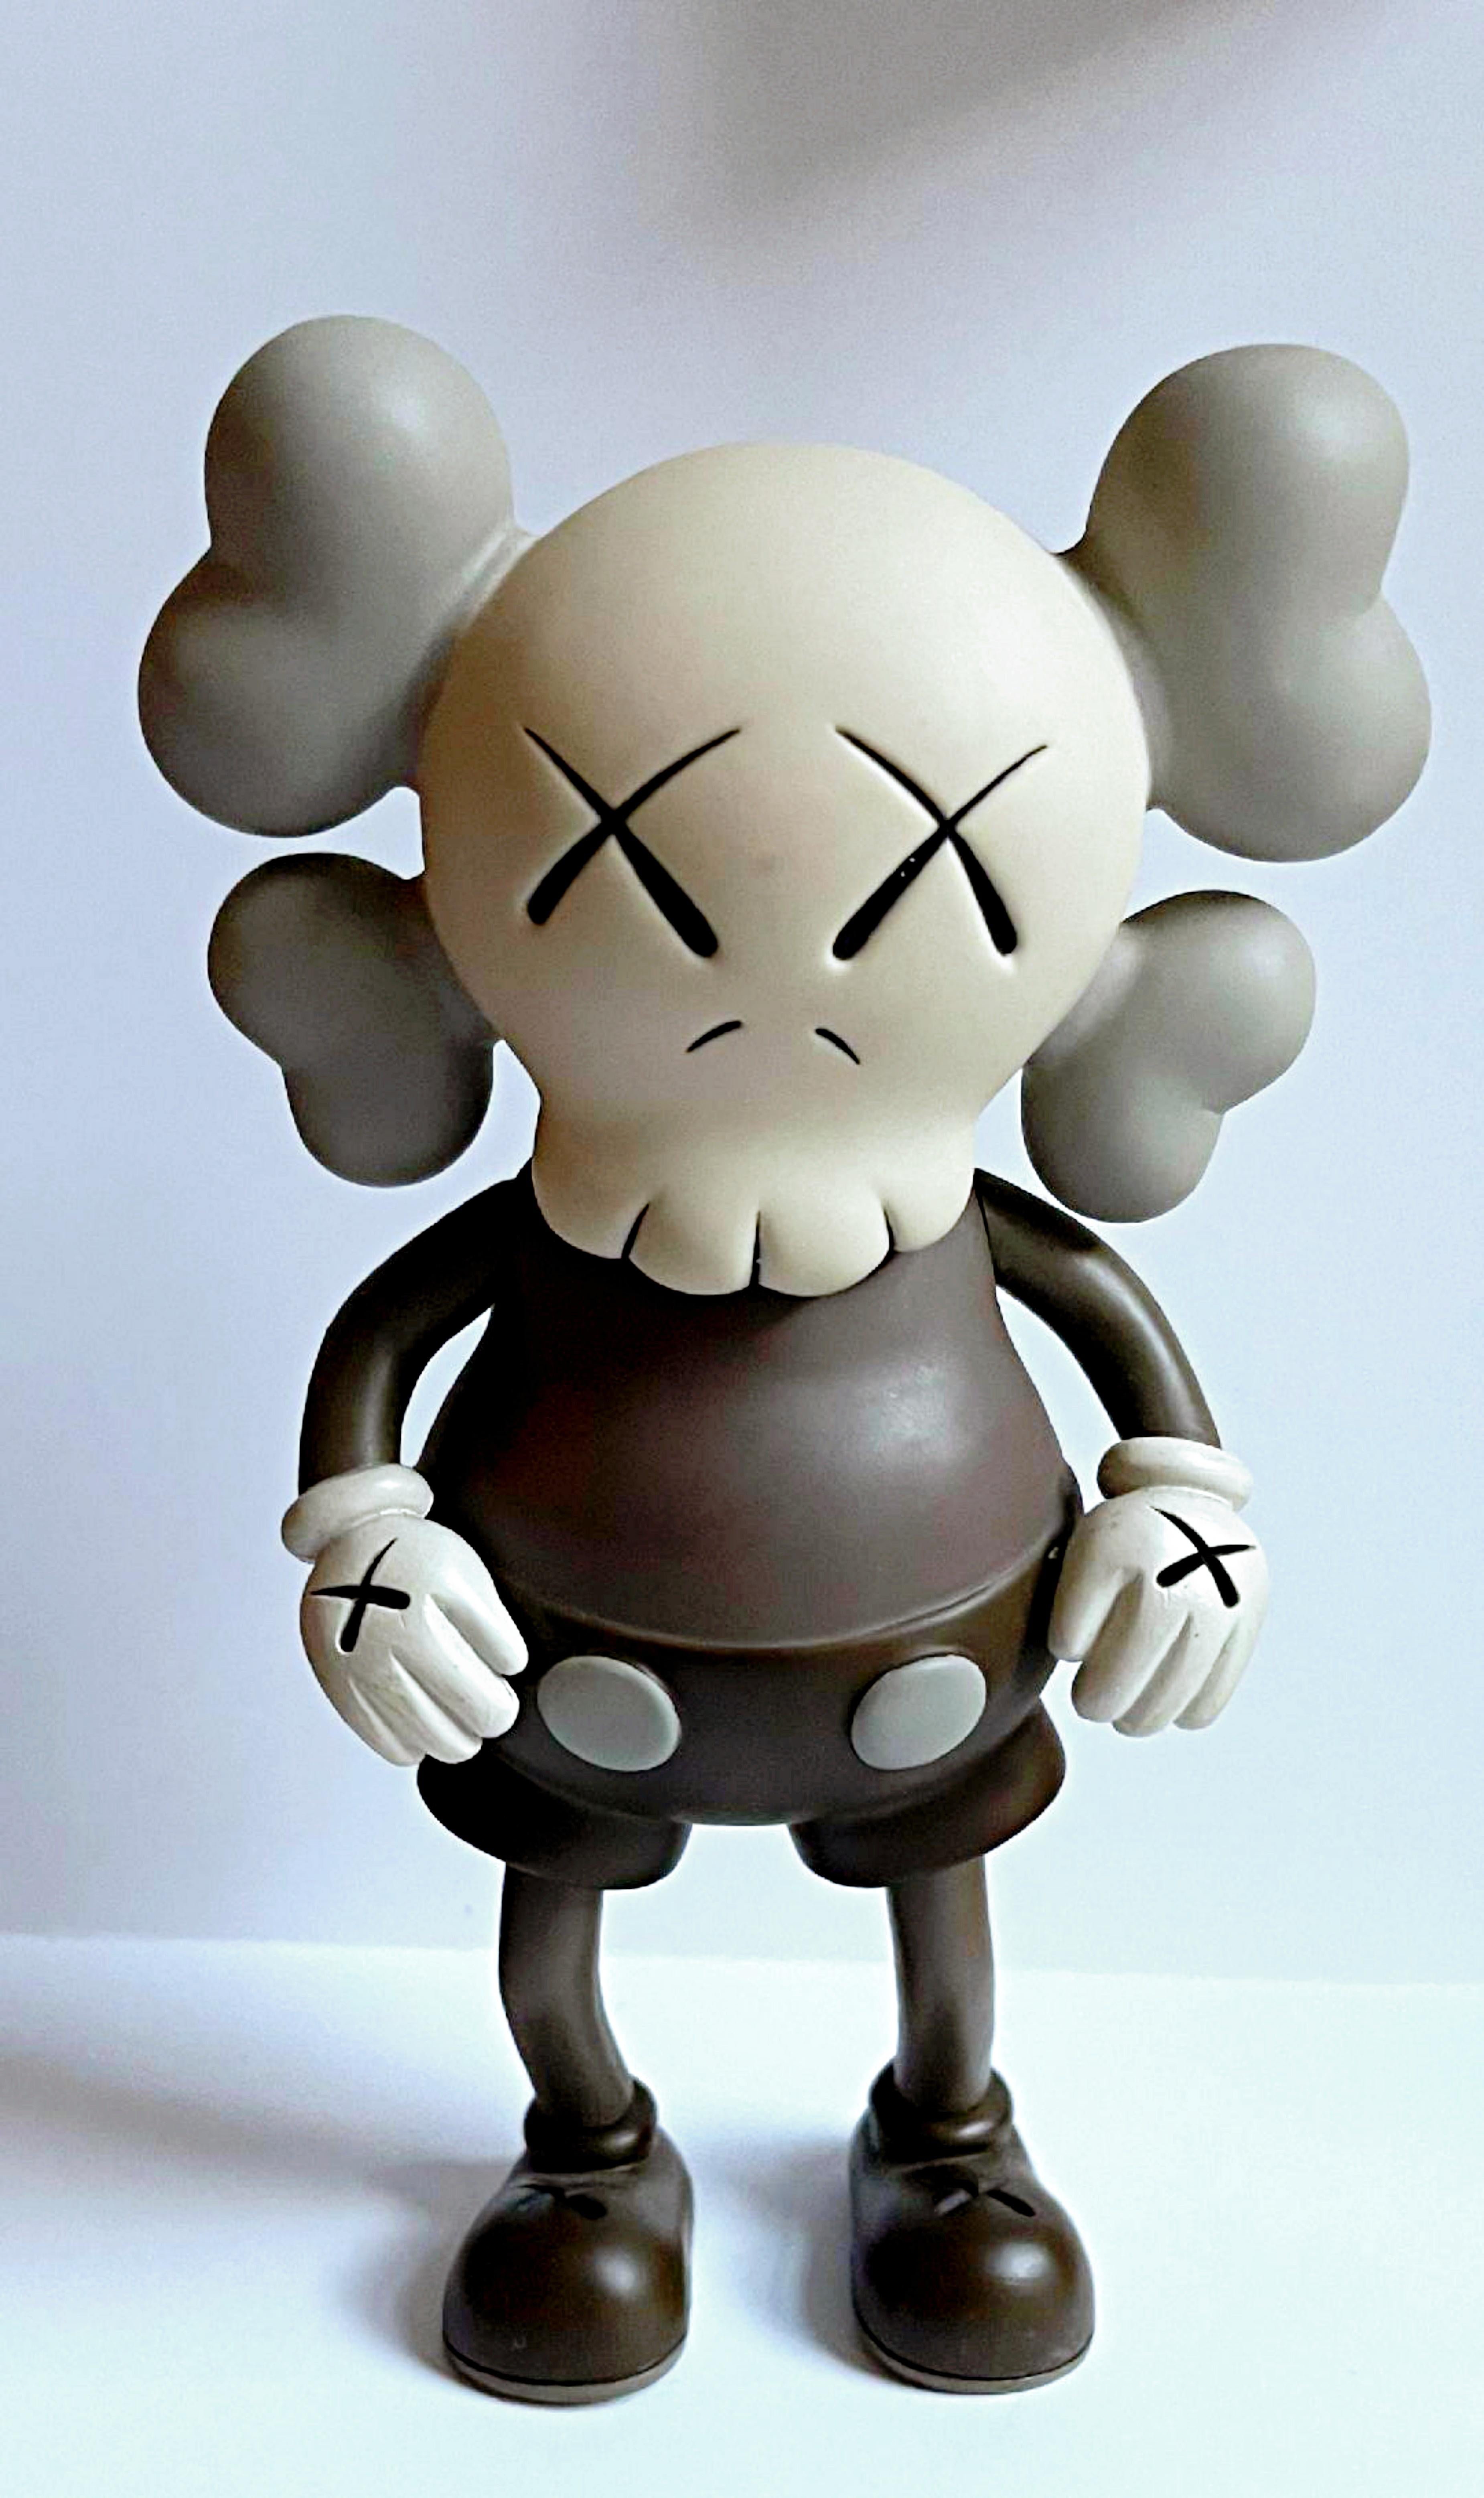 Limited Edition 1st Companion (Hand Signed by KAWS)